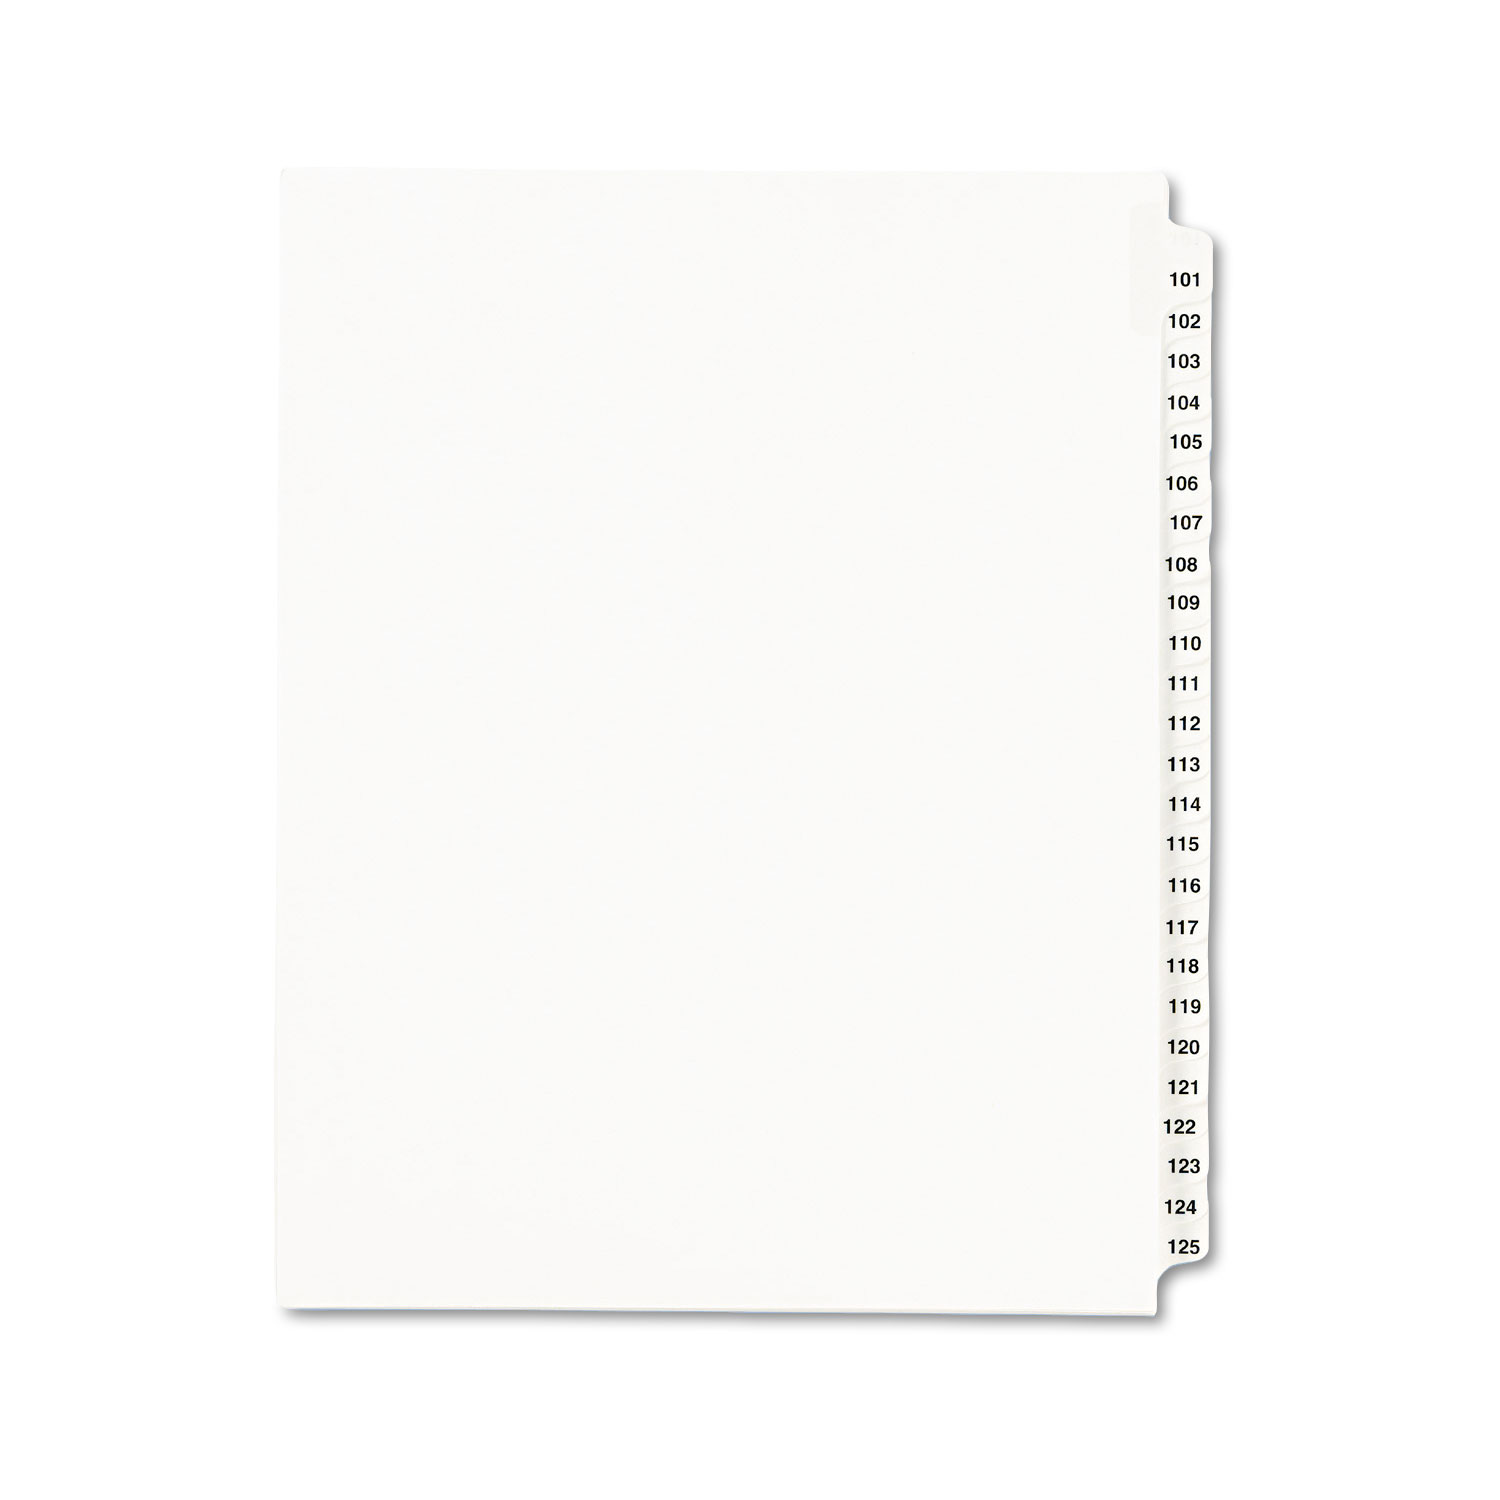  Avery 01334 Preprinted Legal Exhibit Side Tab Index Dividers, Avery Style, 25-Tab, 101 to 125, 11 x 8.5, White, 1 Set (AVE01334) 